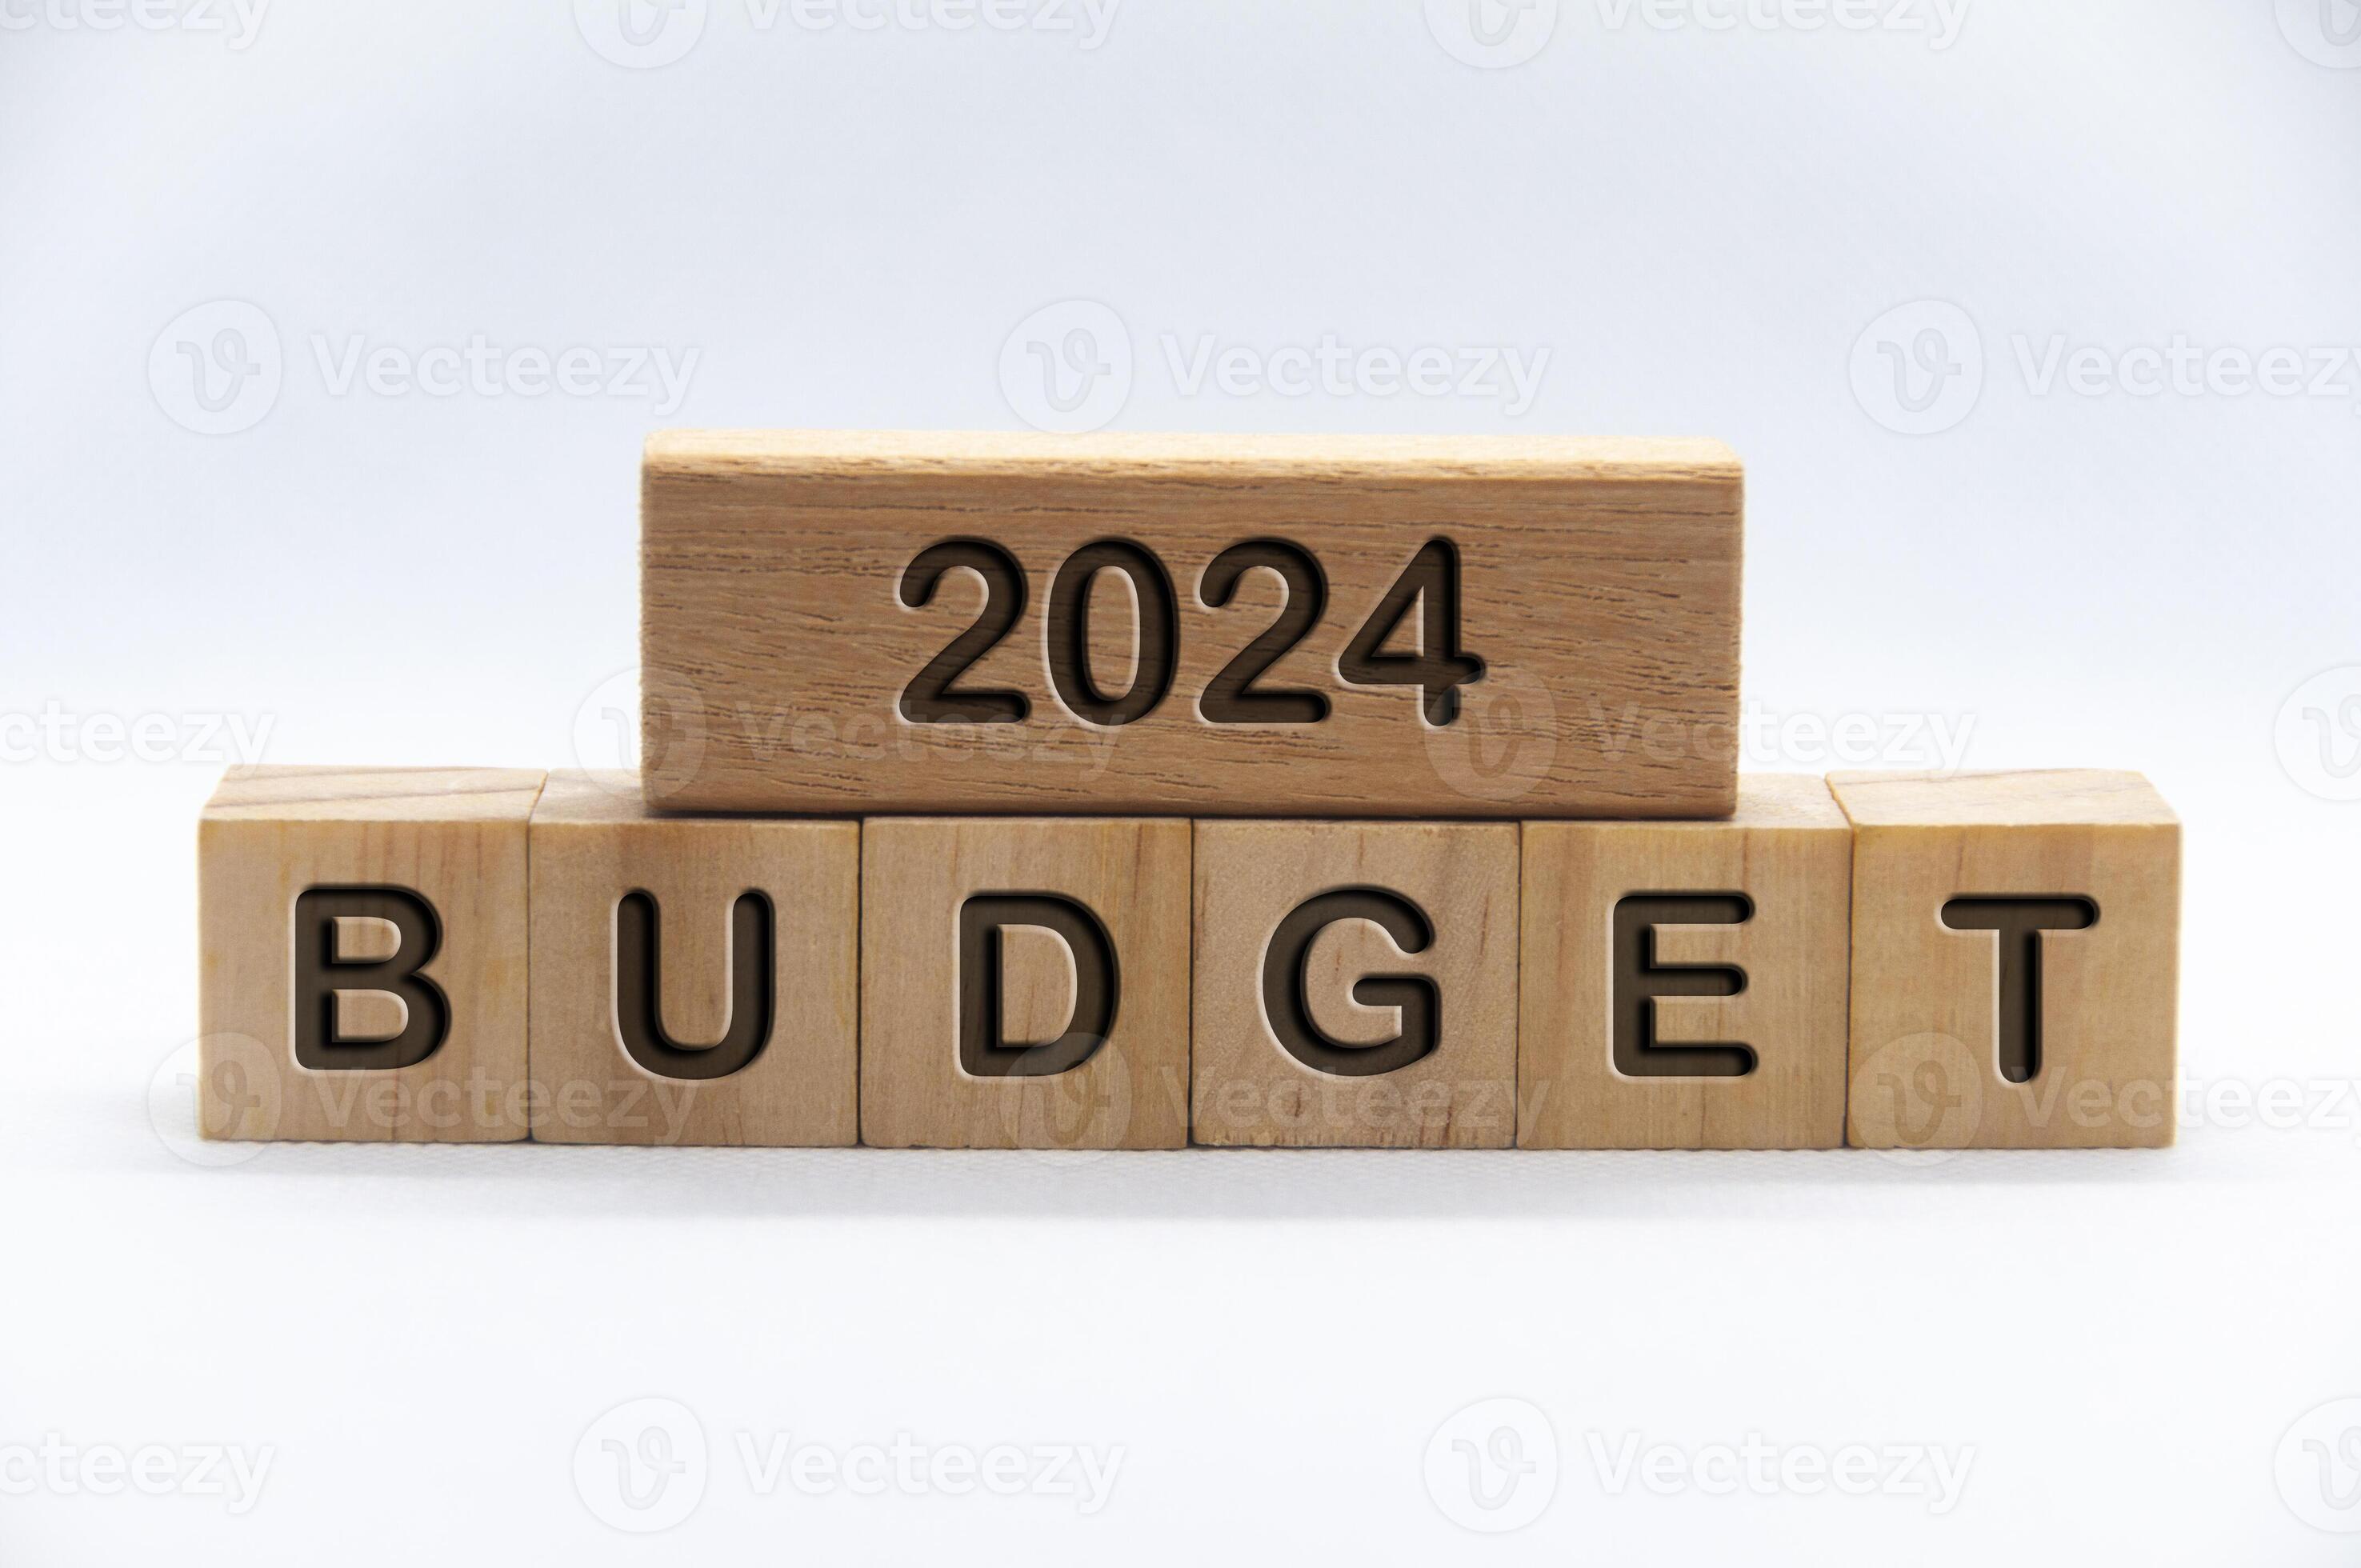 Budget 2024 text engraved on wooden blocks with white cover background